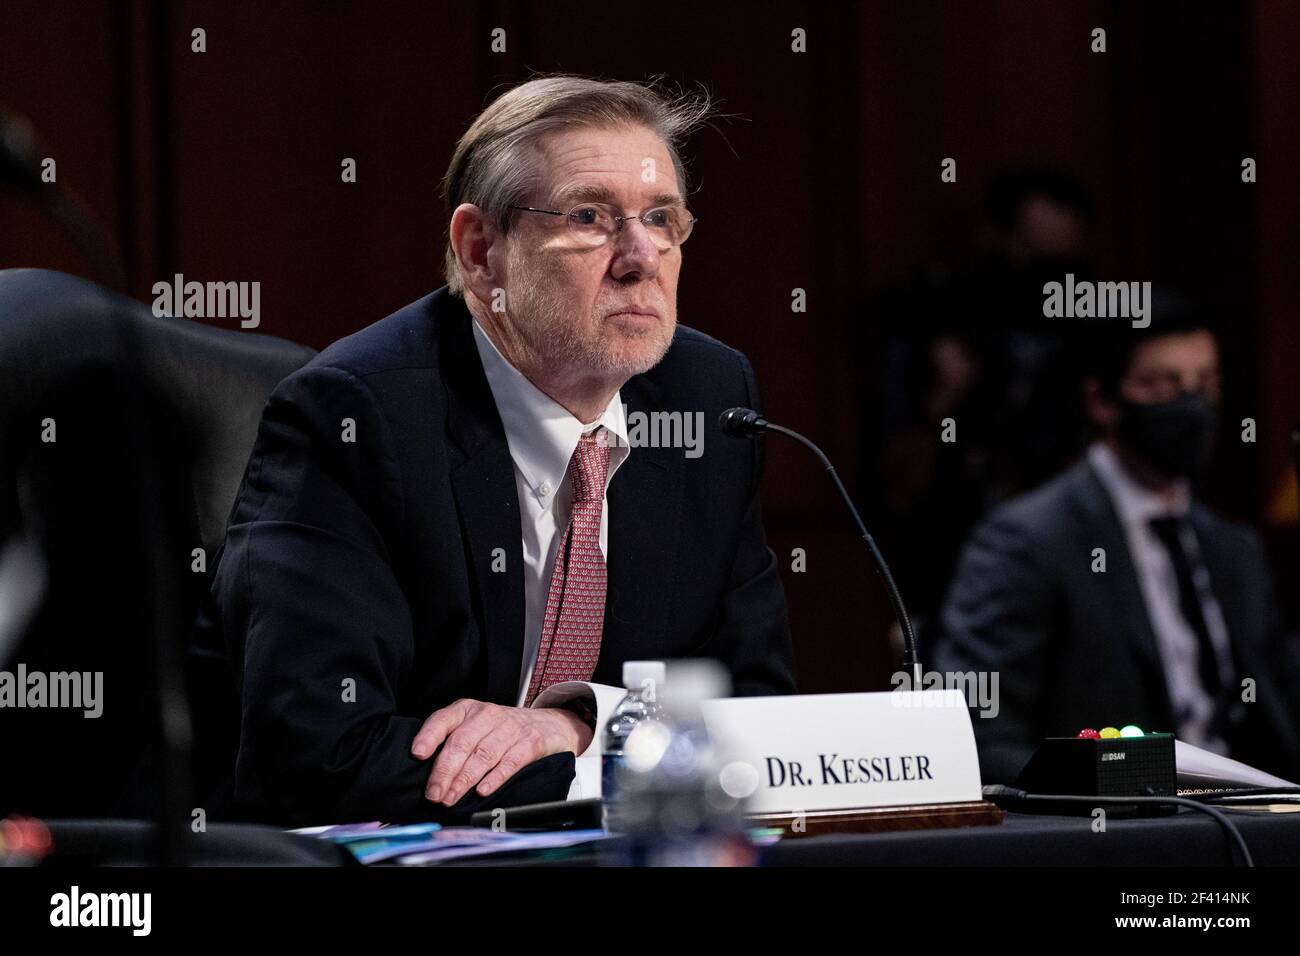 Washington, USA. 18th Mar, 2021. Dr. David Kessler, Chief Science Officer of the White House COVID-19 Response Team, listens during a hearing, with the Senate Committee on Health, Education, Labor, and Pensions, on the Covid-19 response, on Capitol Hill in Washington March 18th, 2021. (Photo by Anna Moneymaker/Pool/Sipa USA) Credit: Sipa USA/Alamy Live News Stock Photo